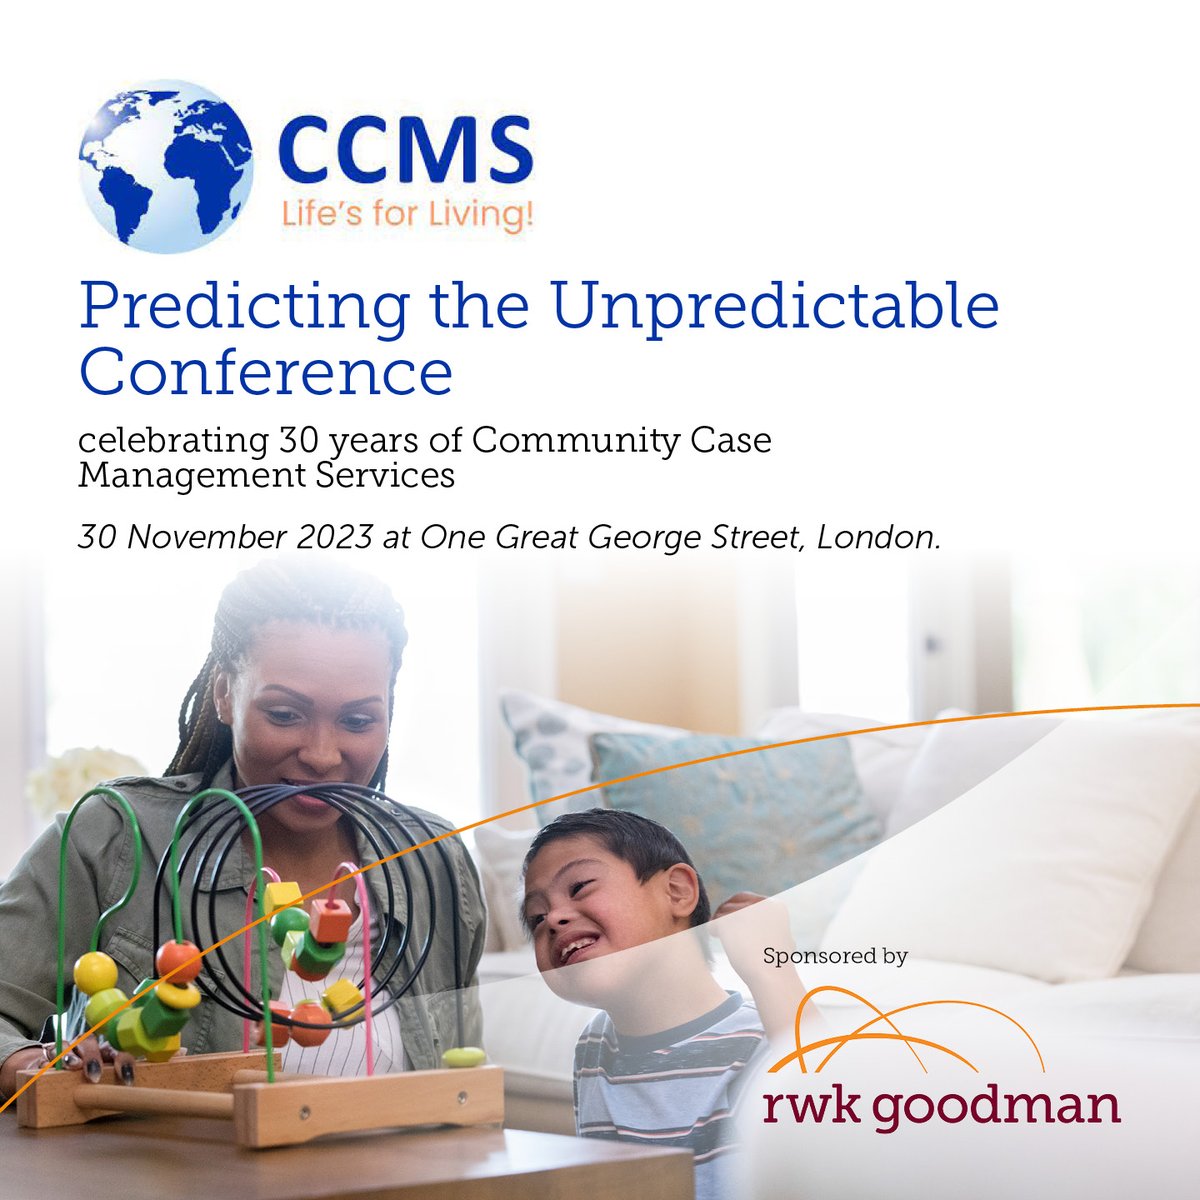 We're proud to be the headline sponsor at @CCMServicesLTD's Predicting the Unpredictable Conference, celebrating 30 years of Community Case Management Services. Find out more here: ccmservices.co.uk/ccms-conference #CCMS2023 #LawFirm @AT_Conference @anchorpoint_abi @SilverTweeters